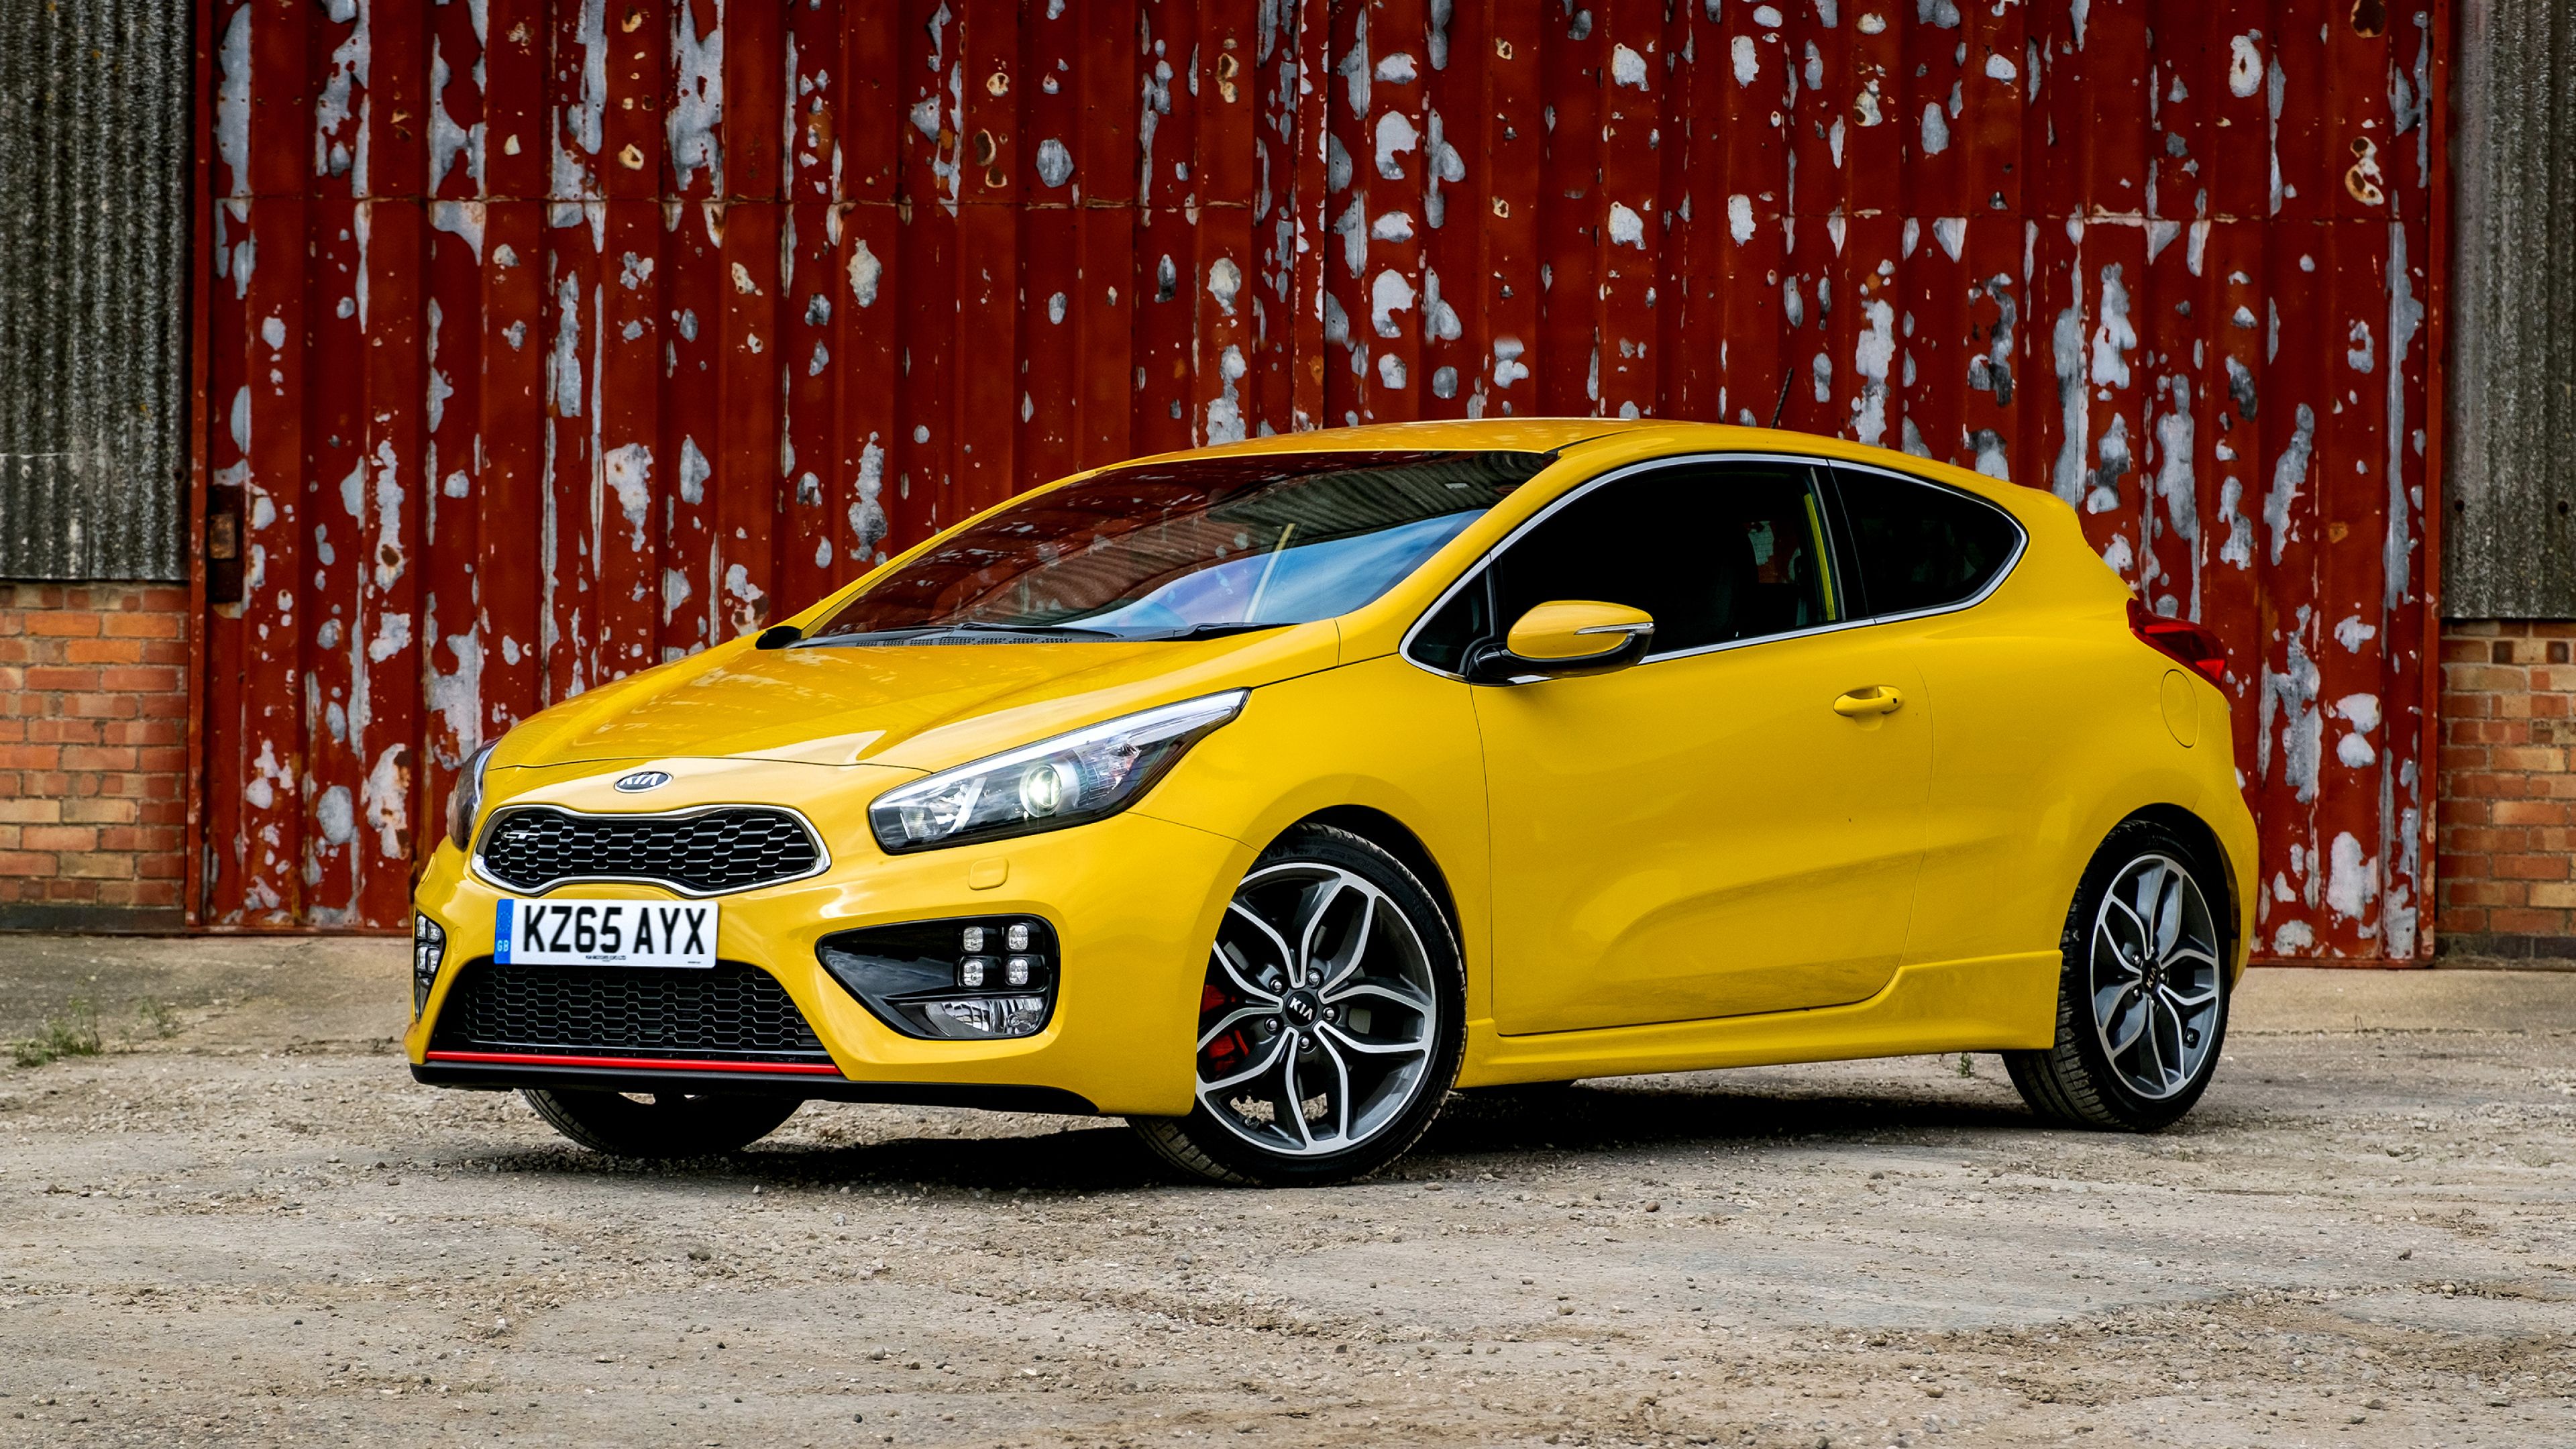 Yellow car Kia Ceed wallpaper and image, picture, photo